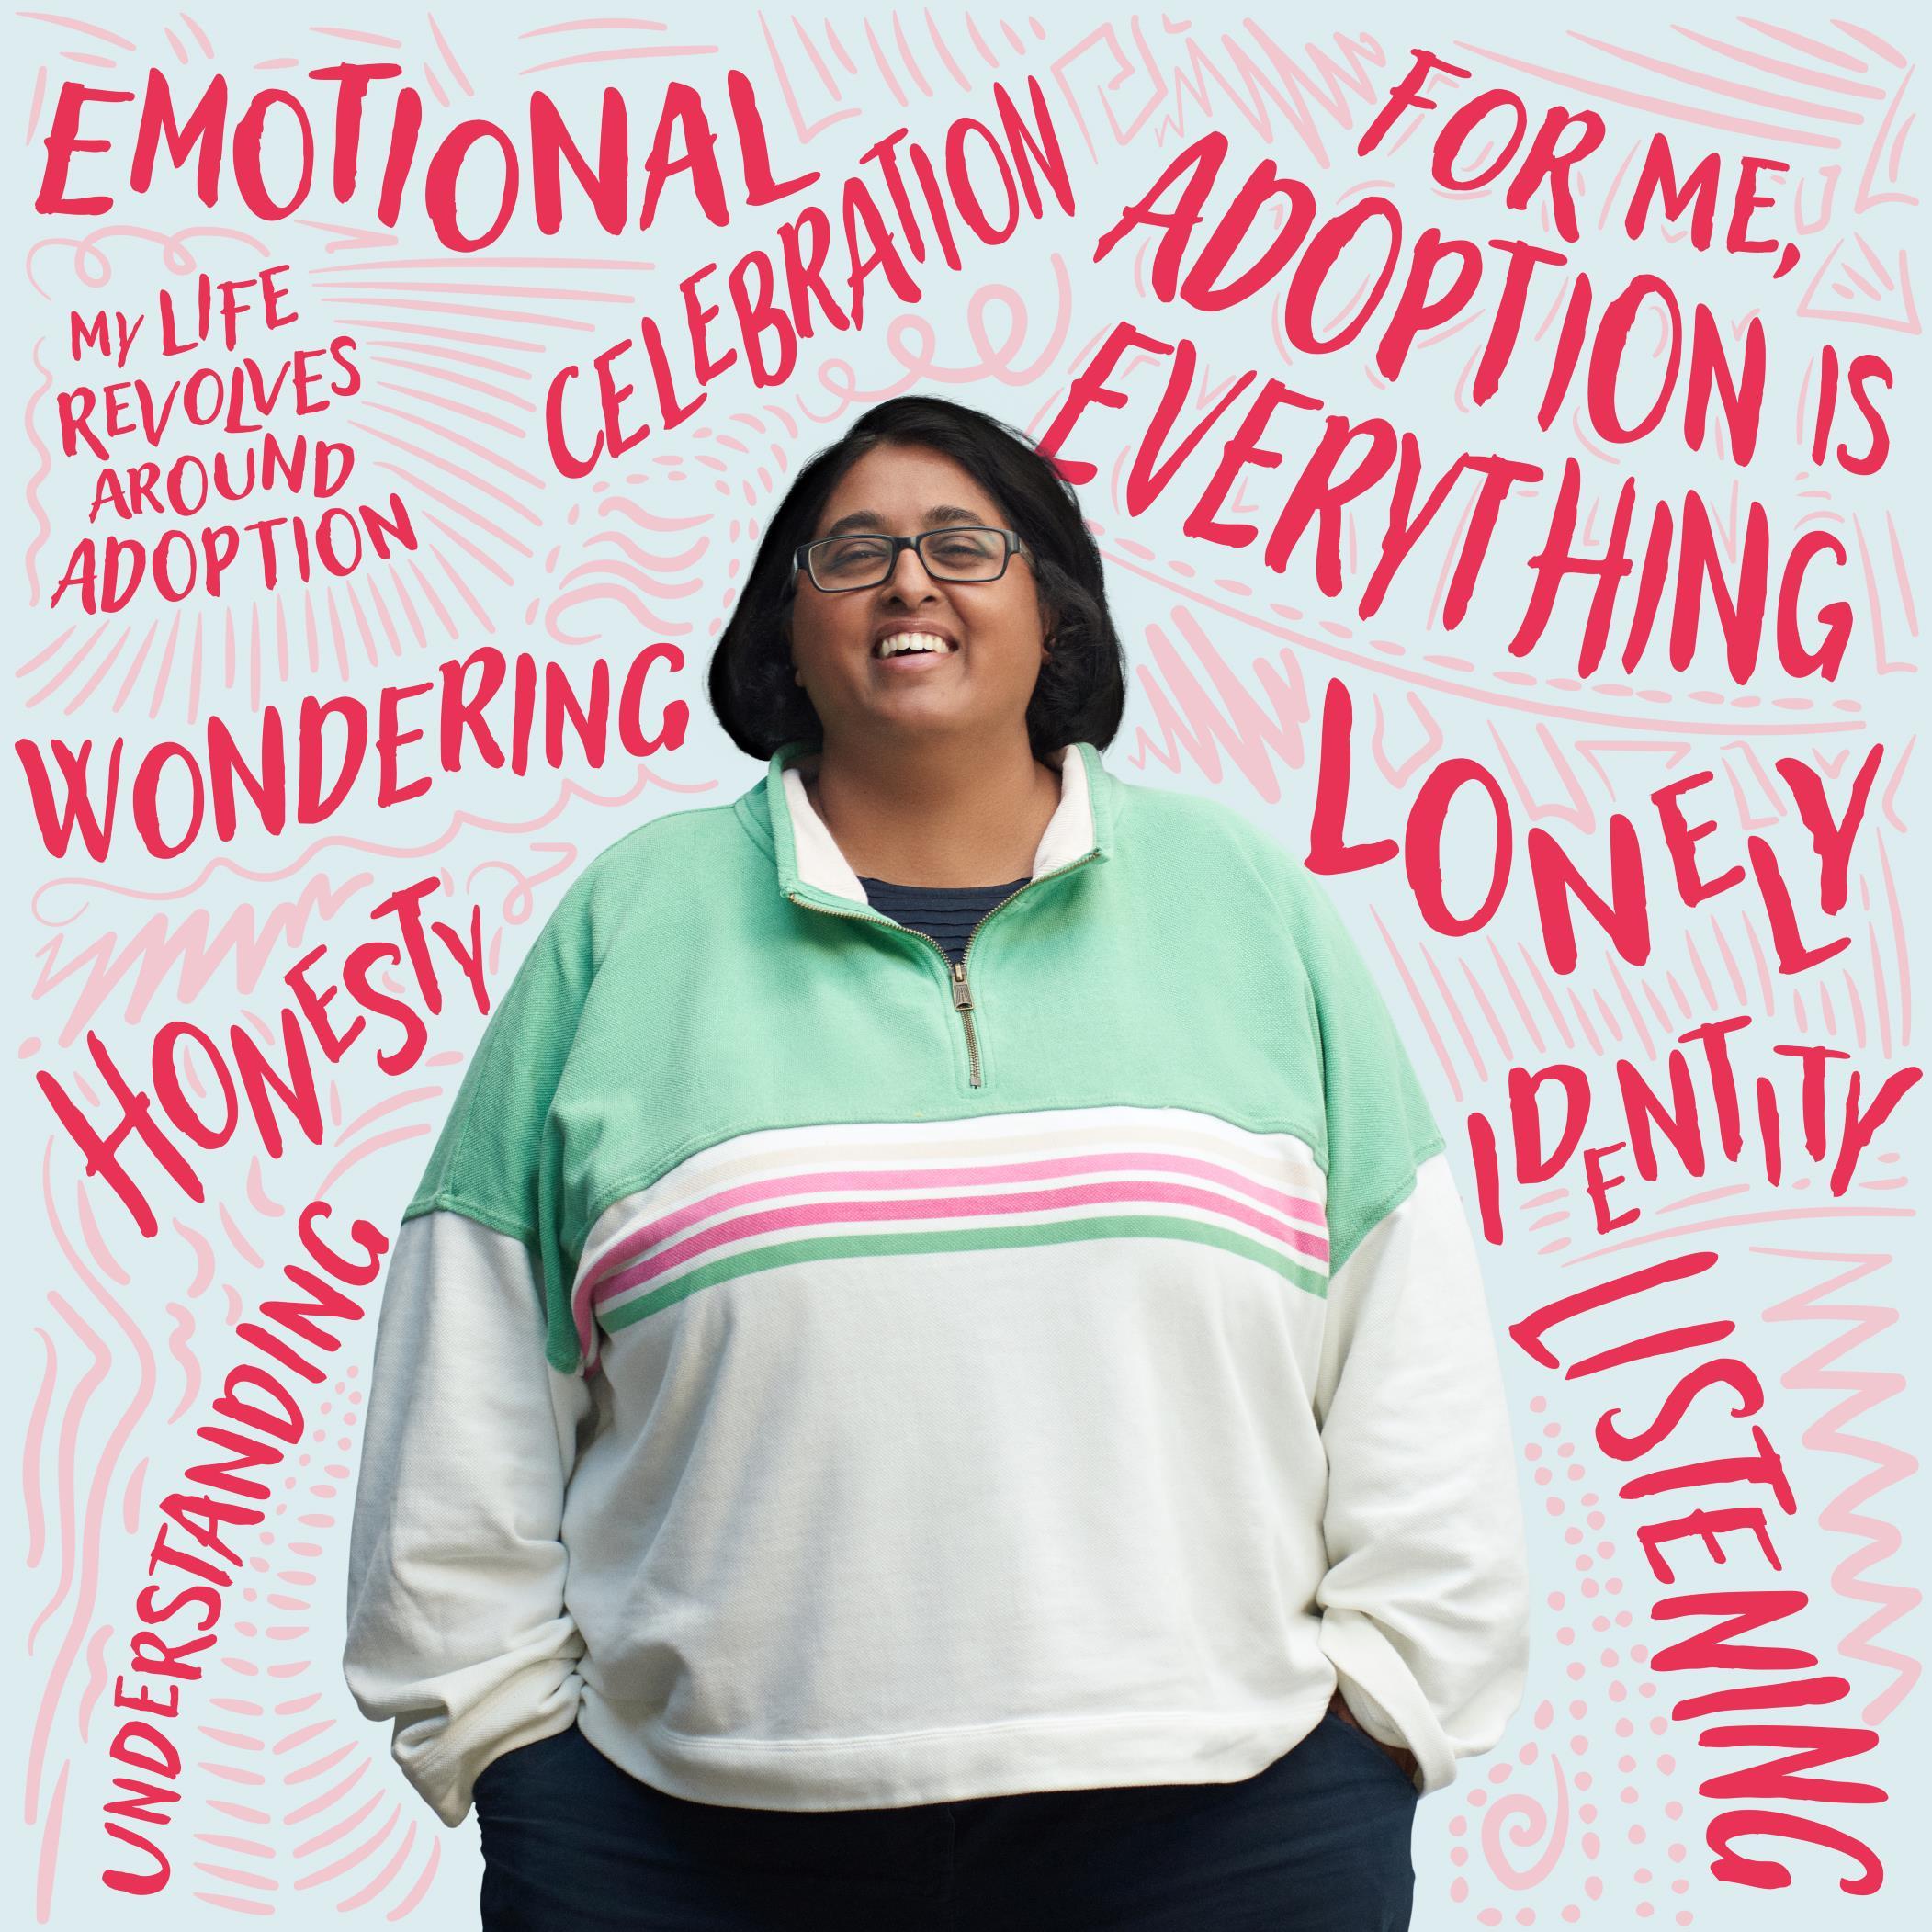 The pic is of adoptee Isabelle surrounded by emotive, poignant words that describe her own adoption journey.